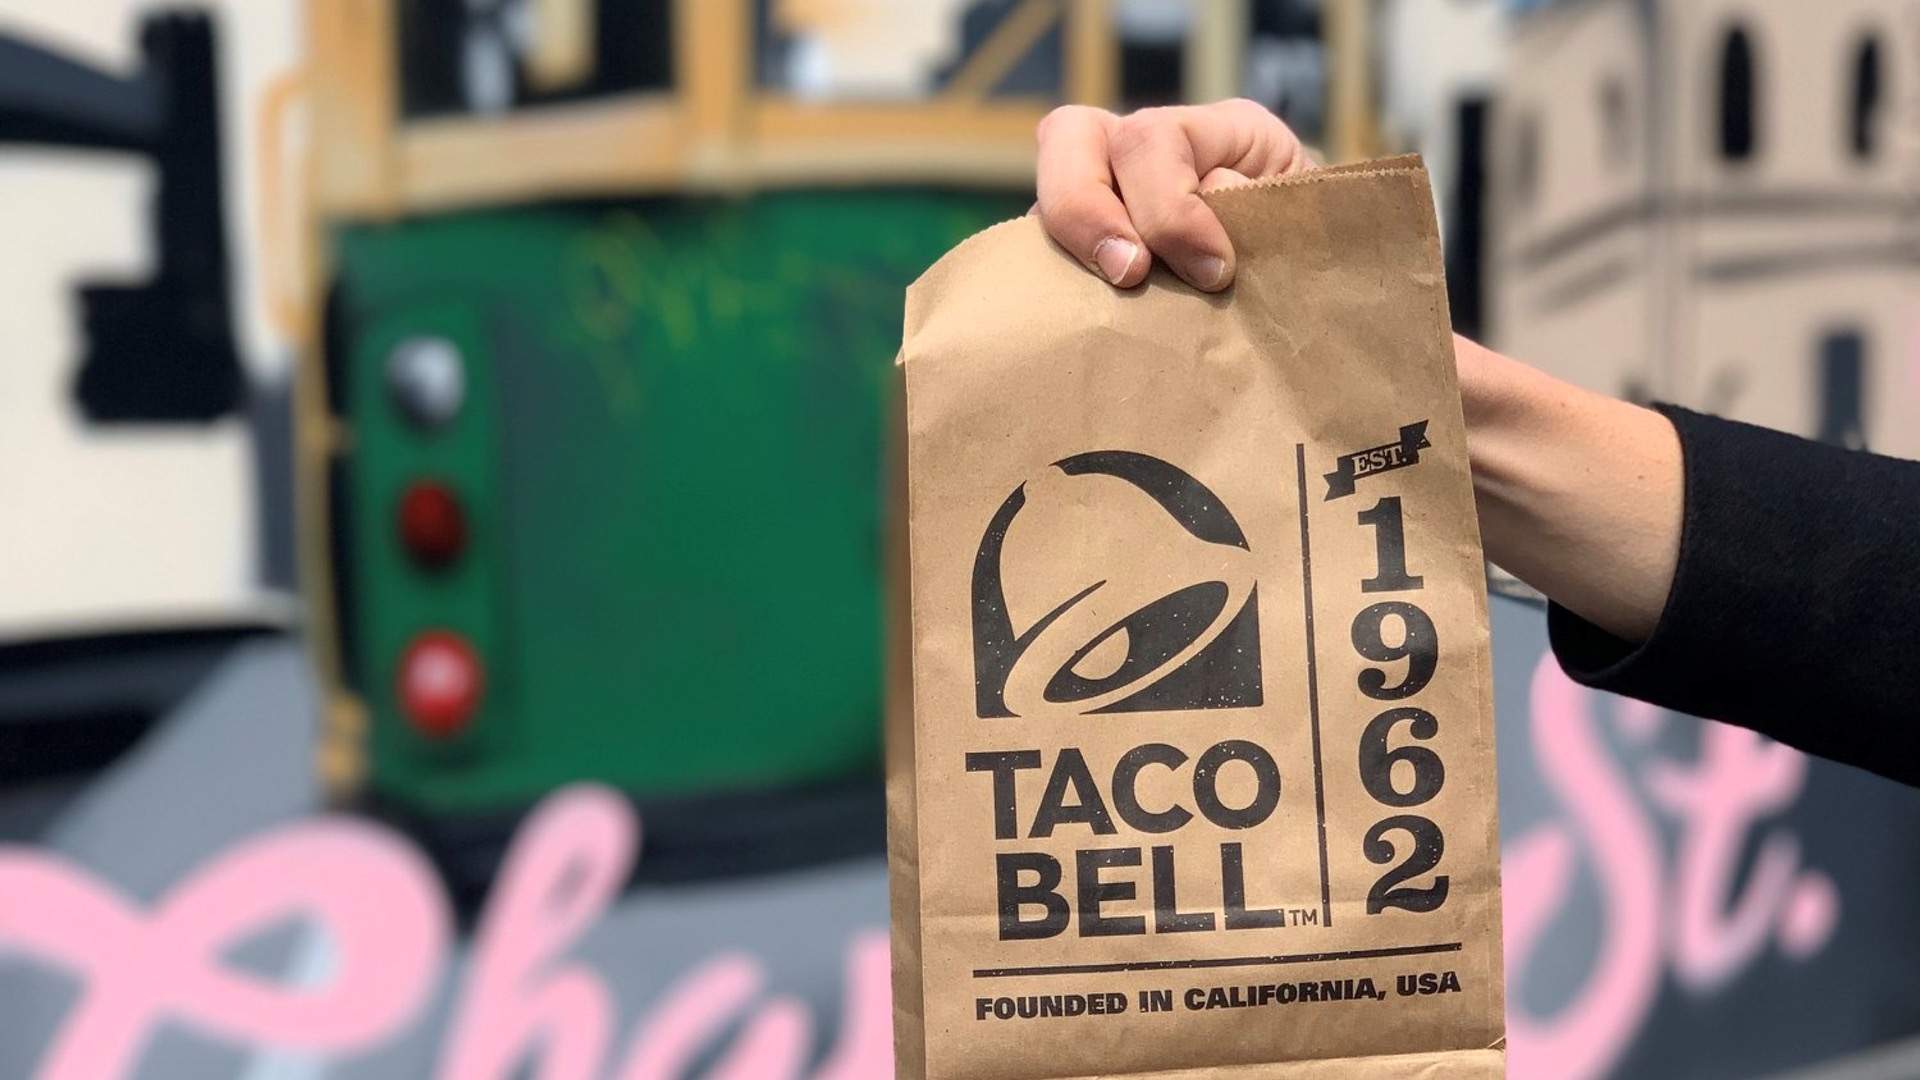 Taco Bell Is Now Offering Free Delivery So You Can Still Get Your Taco Fix in Iso